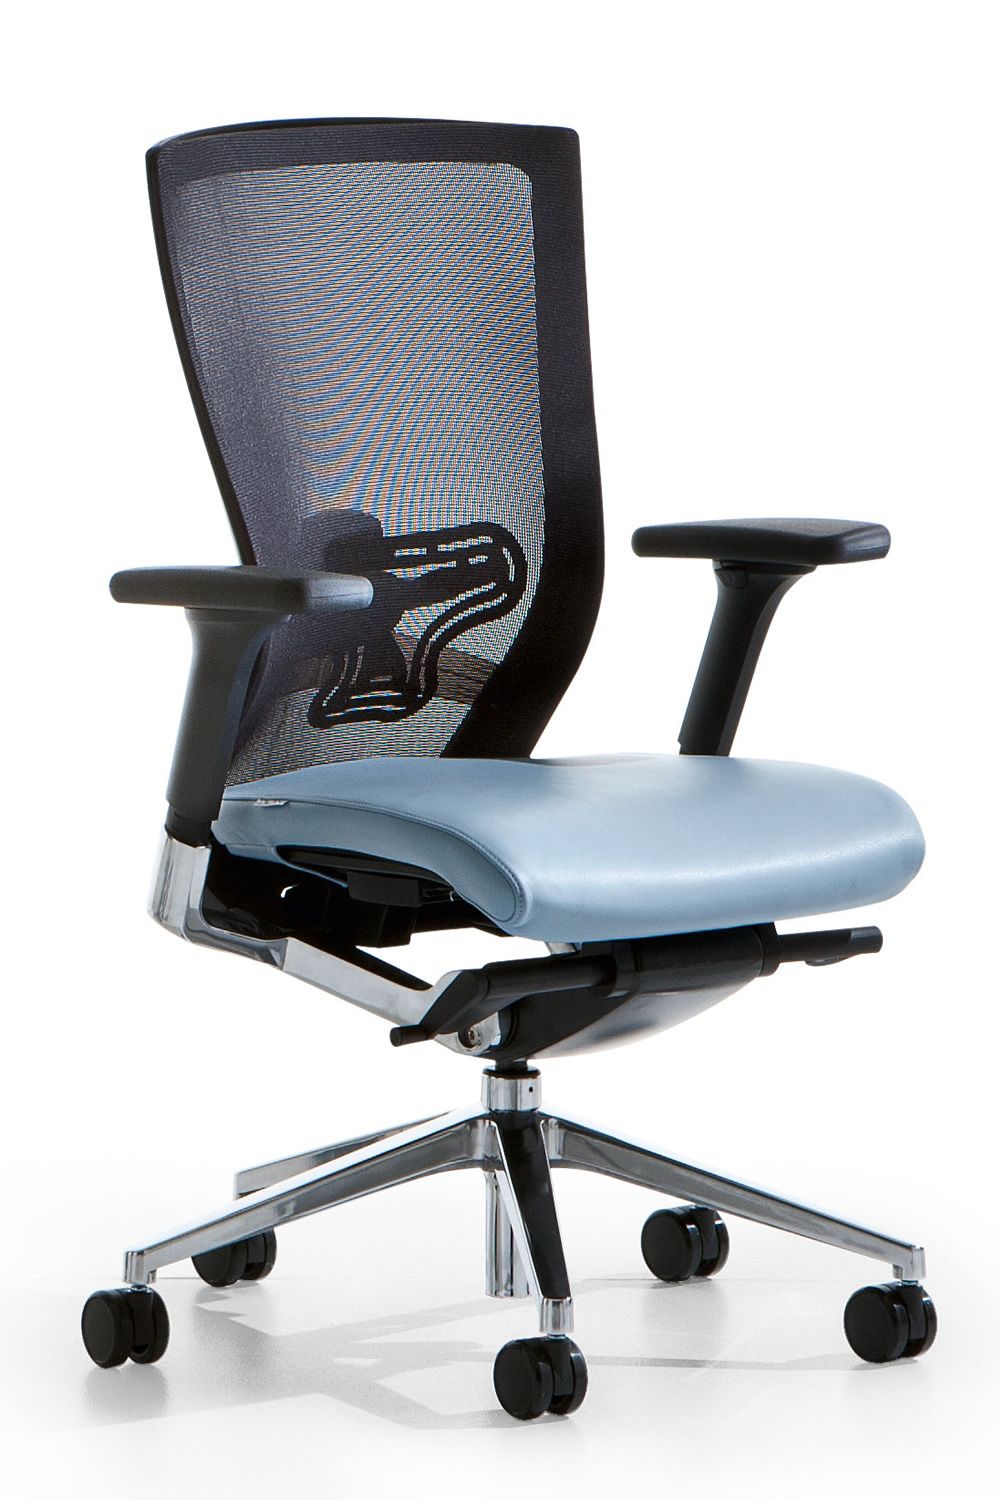 X-Chair - Office executive chair, with or without headrest, padded seat